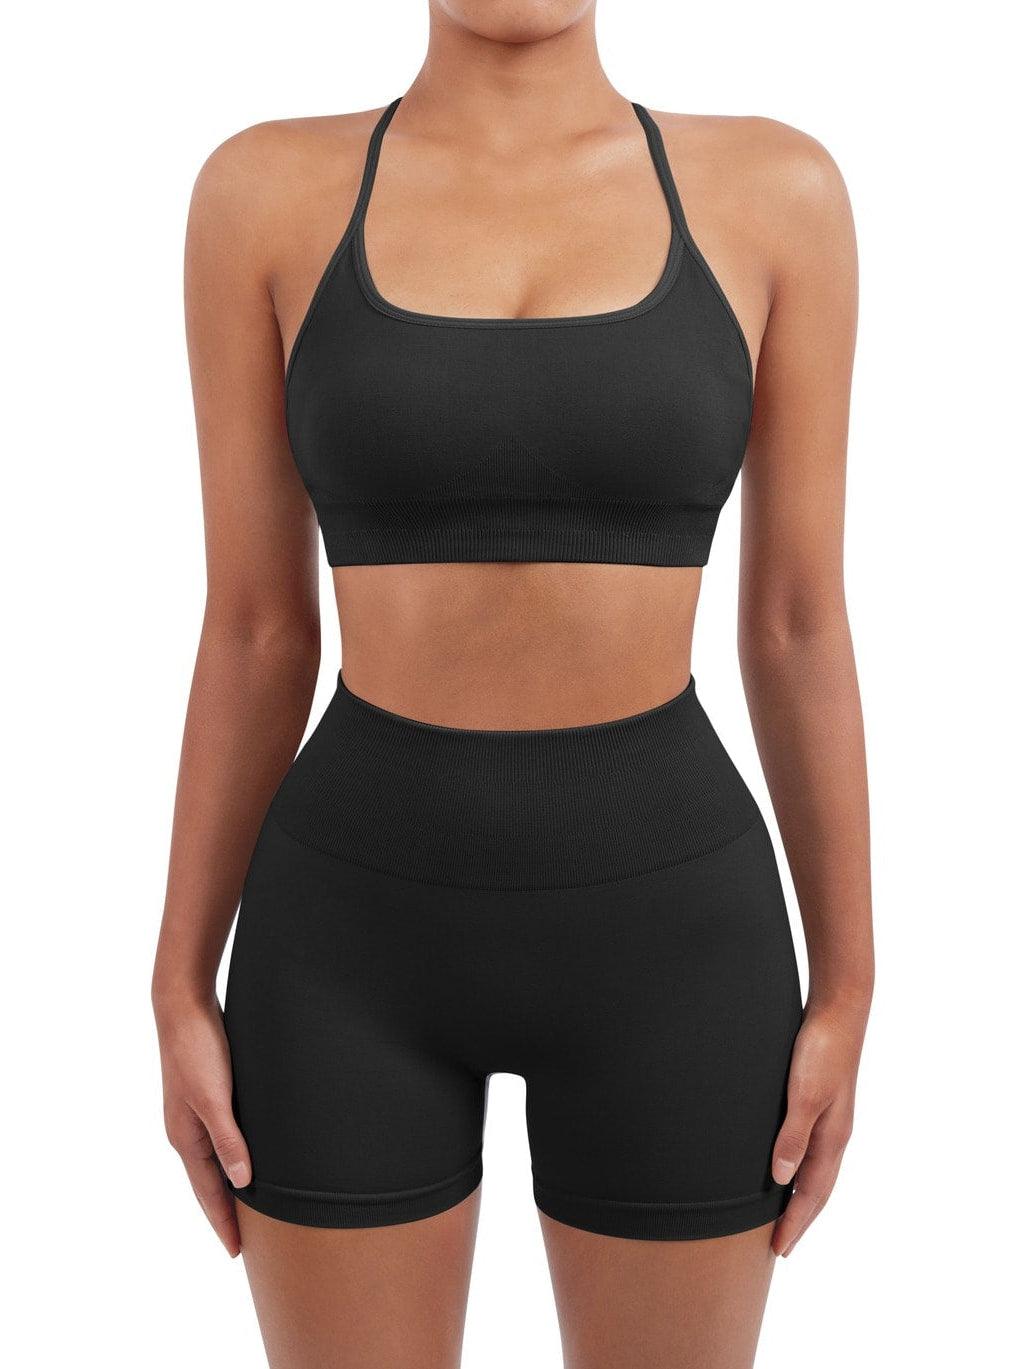 Happy Friday!! 💪Show off your curves in our cute workout set - designed  for comfort and confidence.🥰 #SUUKSESS #Sportsset #Sports